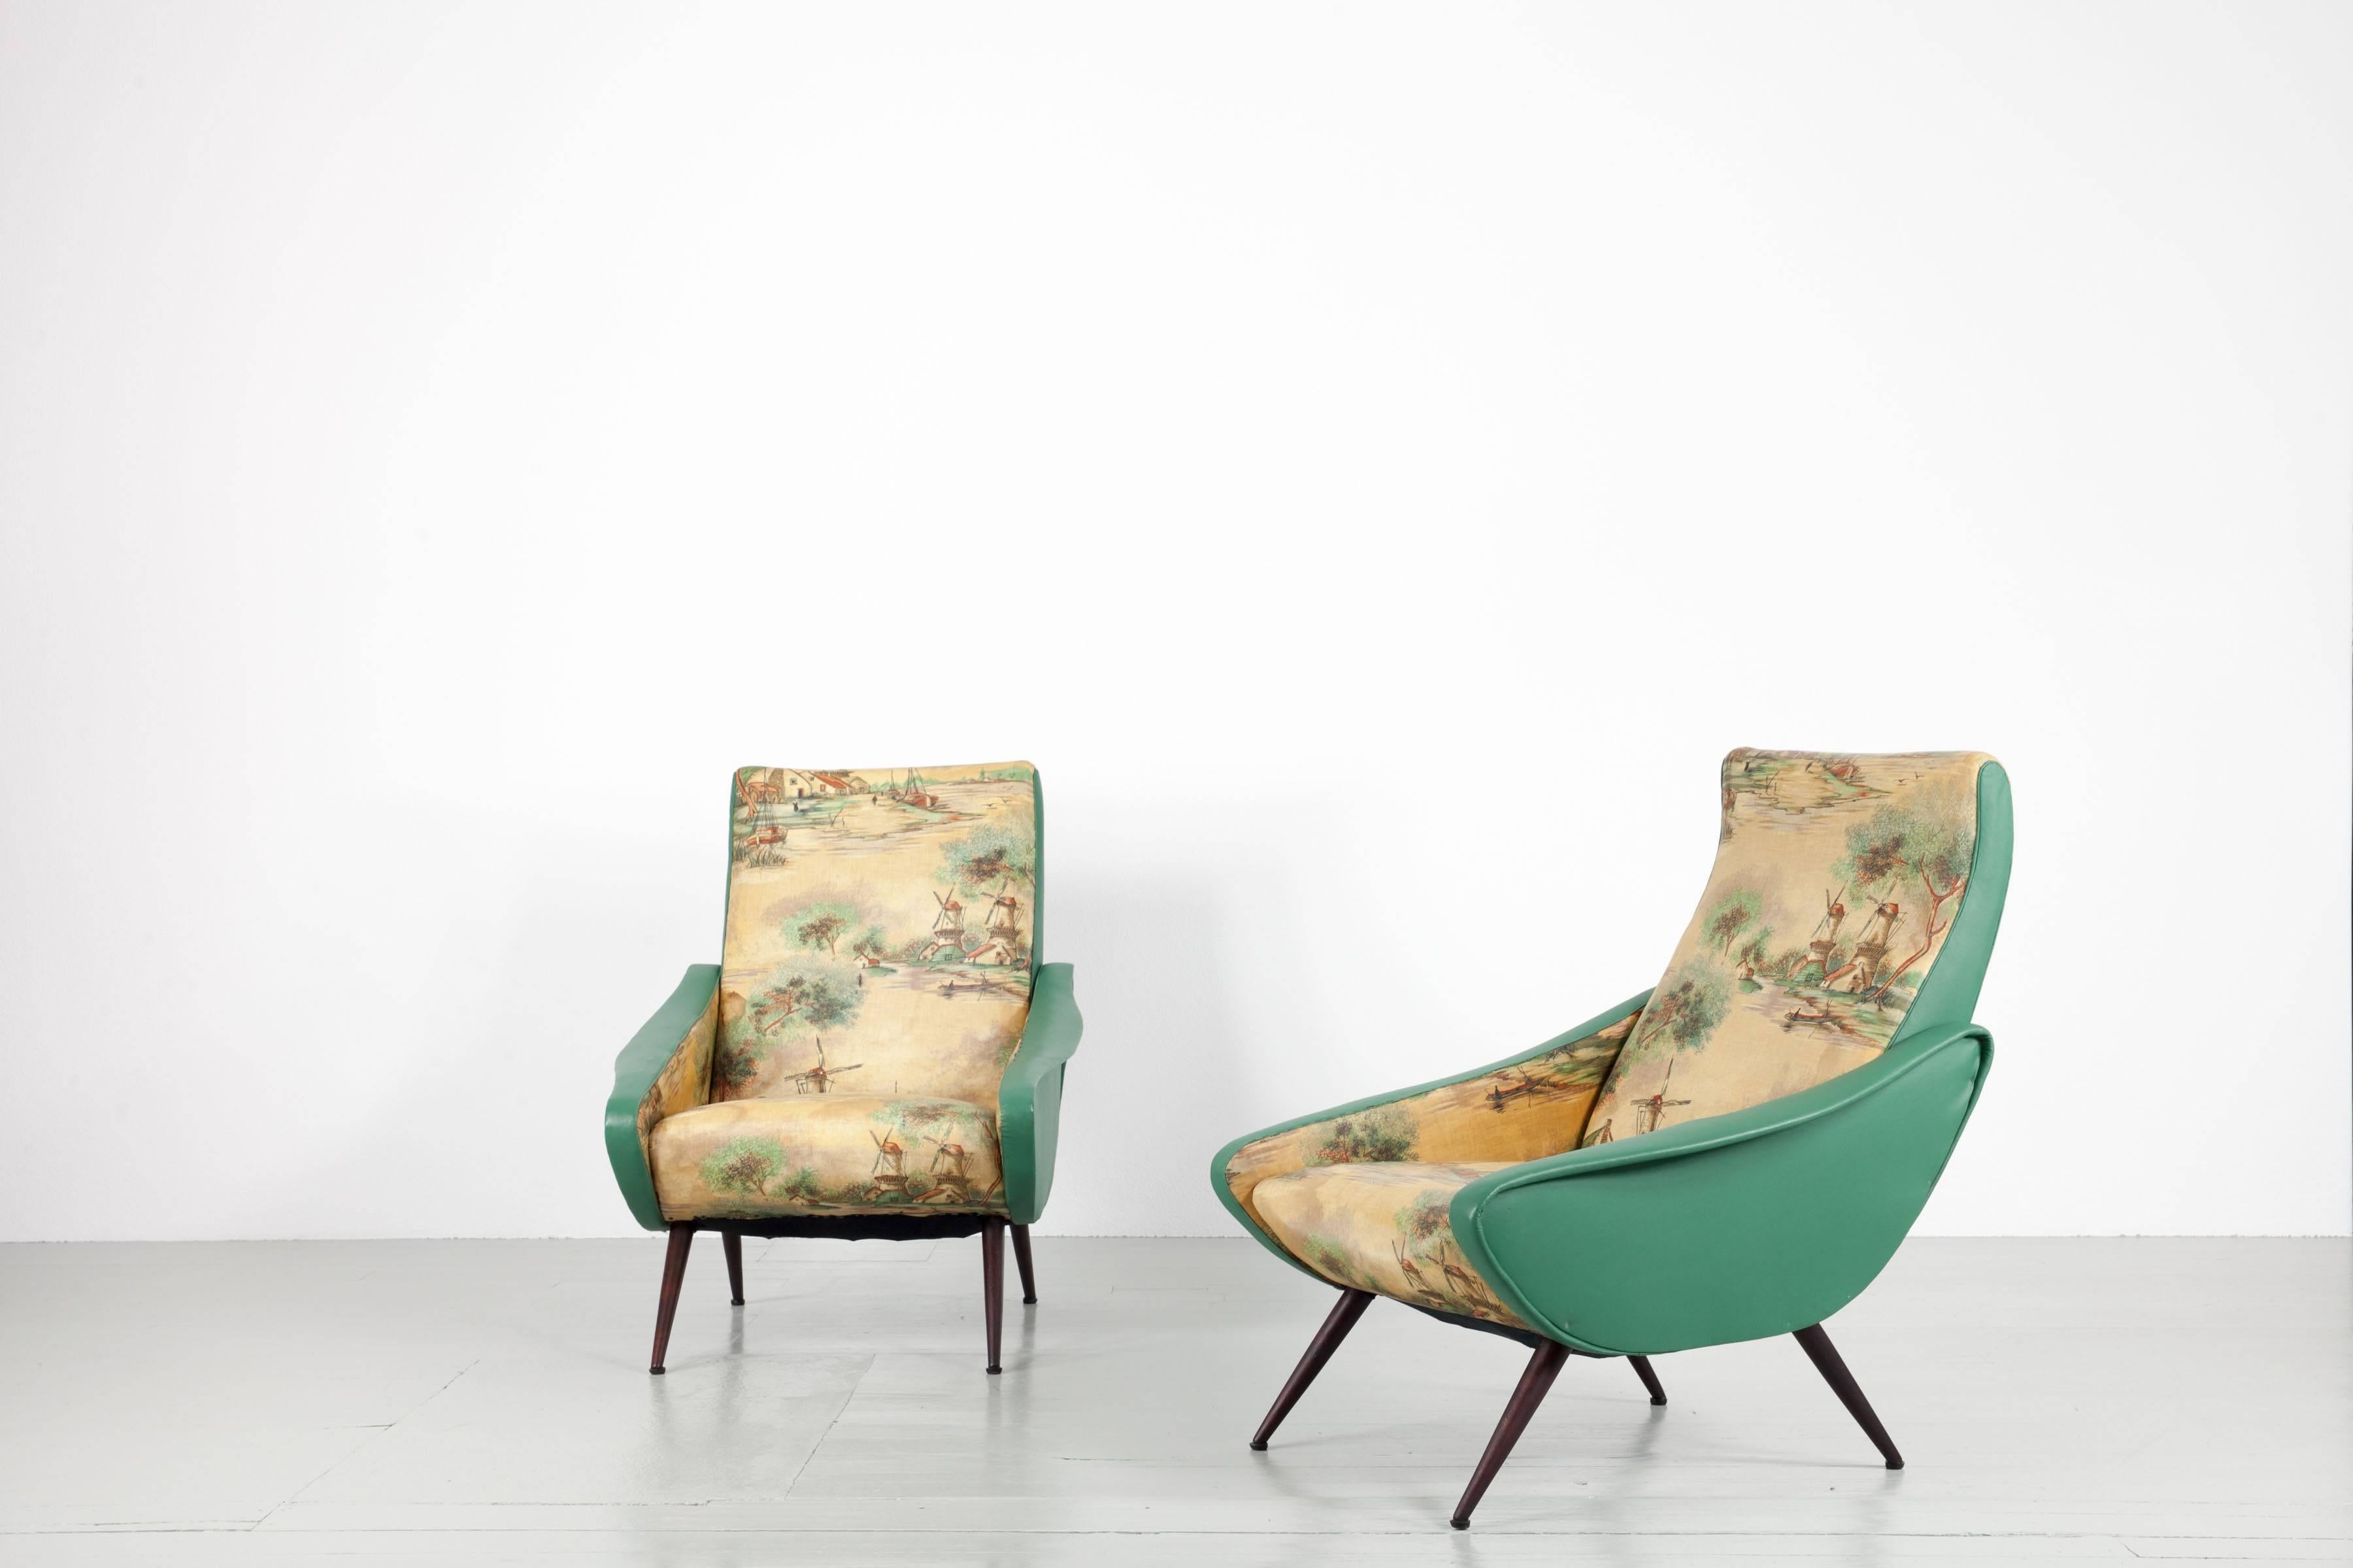 Set of 2 Italian Chairs, Two-Tone Cover, Turquoise and Landscape Motive, 1950s For Sale 5